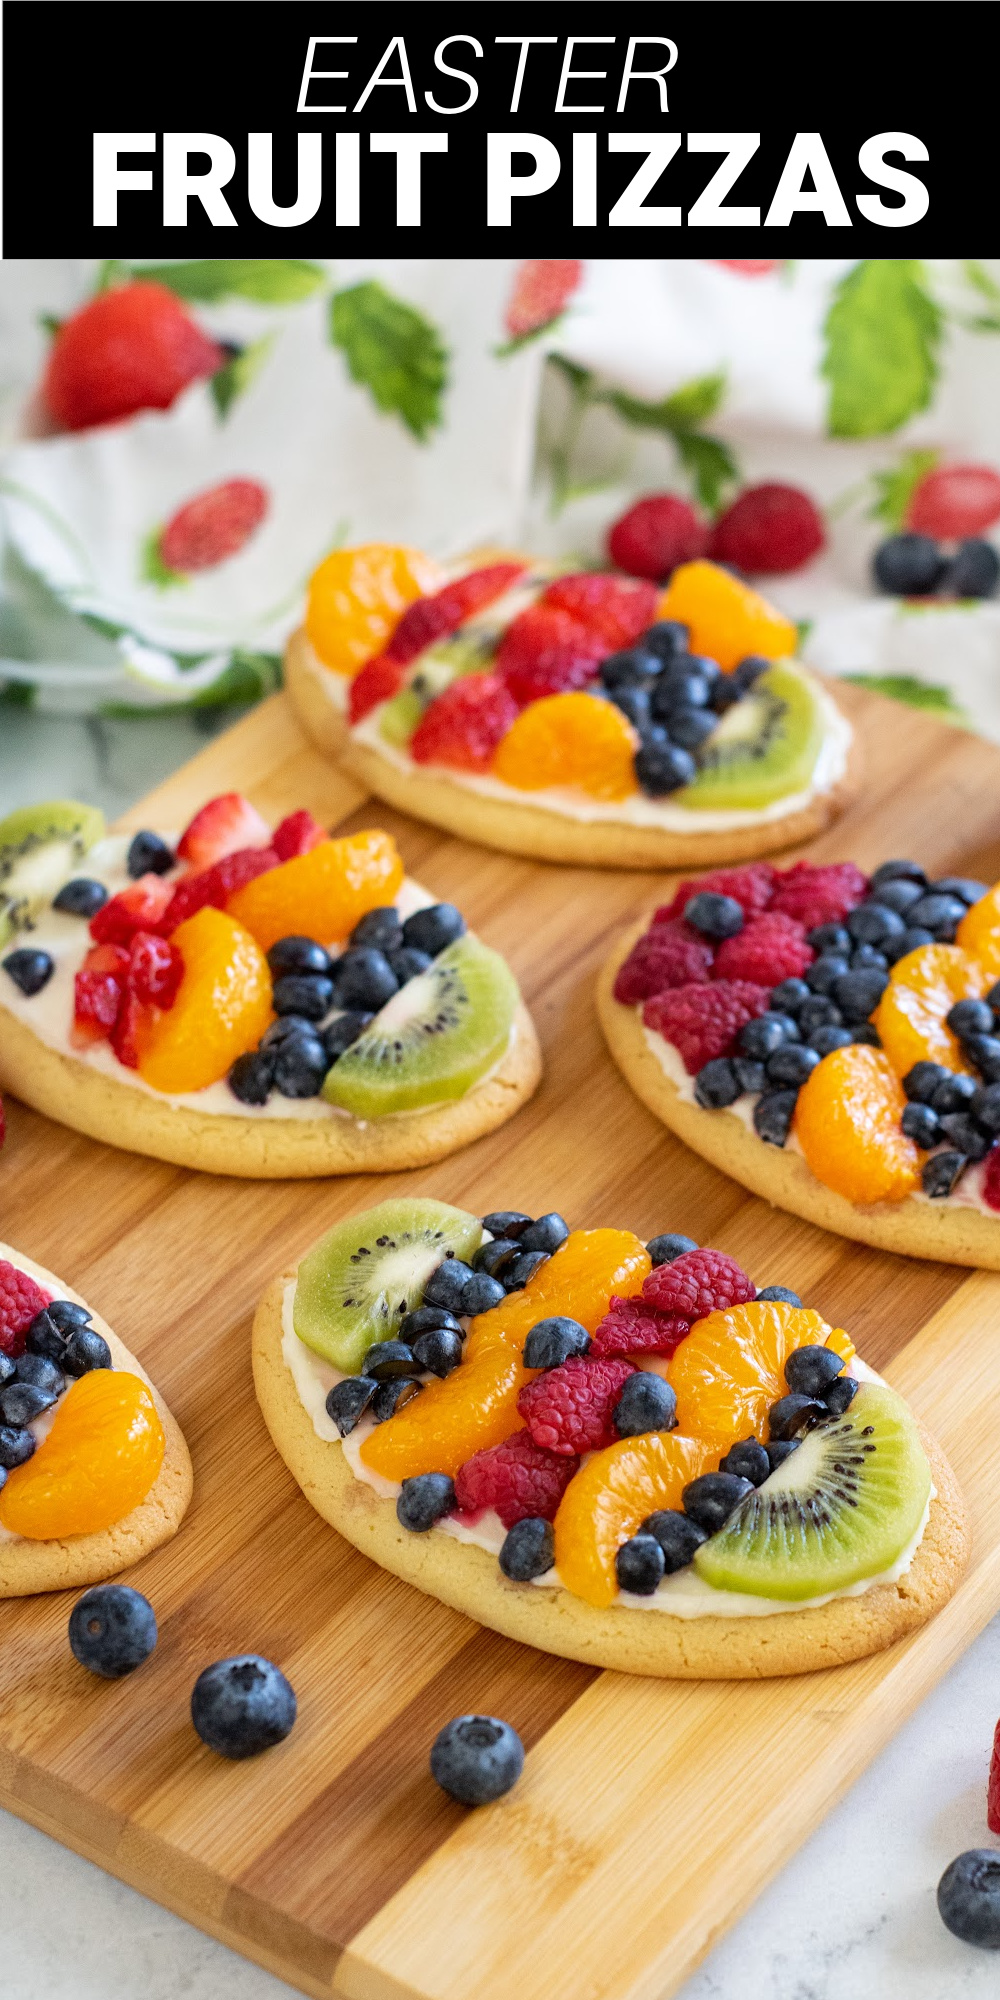 These delectable Easter Egg Fruit Pizzas are sweet egg-shaped sugar cookies, decorated with fresh and juicy fruit and a rich and smooth cream cheese frosting. They will be the star attraction on your Easter table this year.